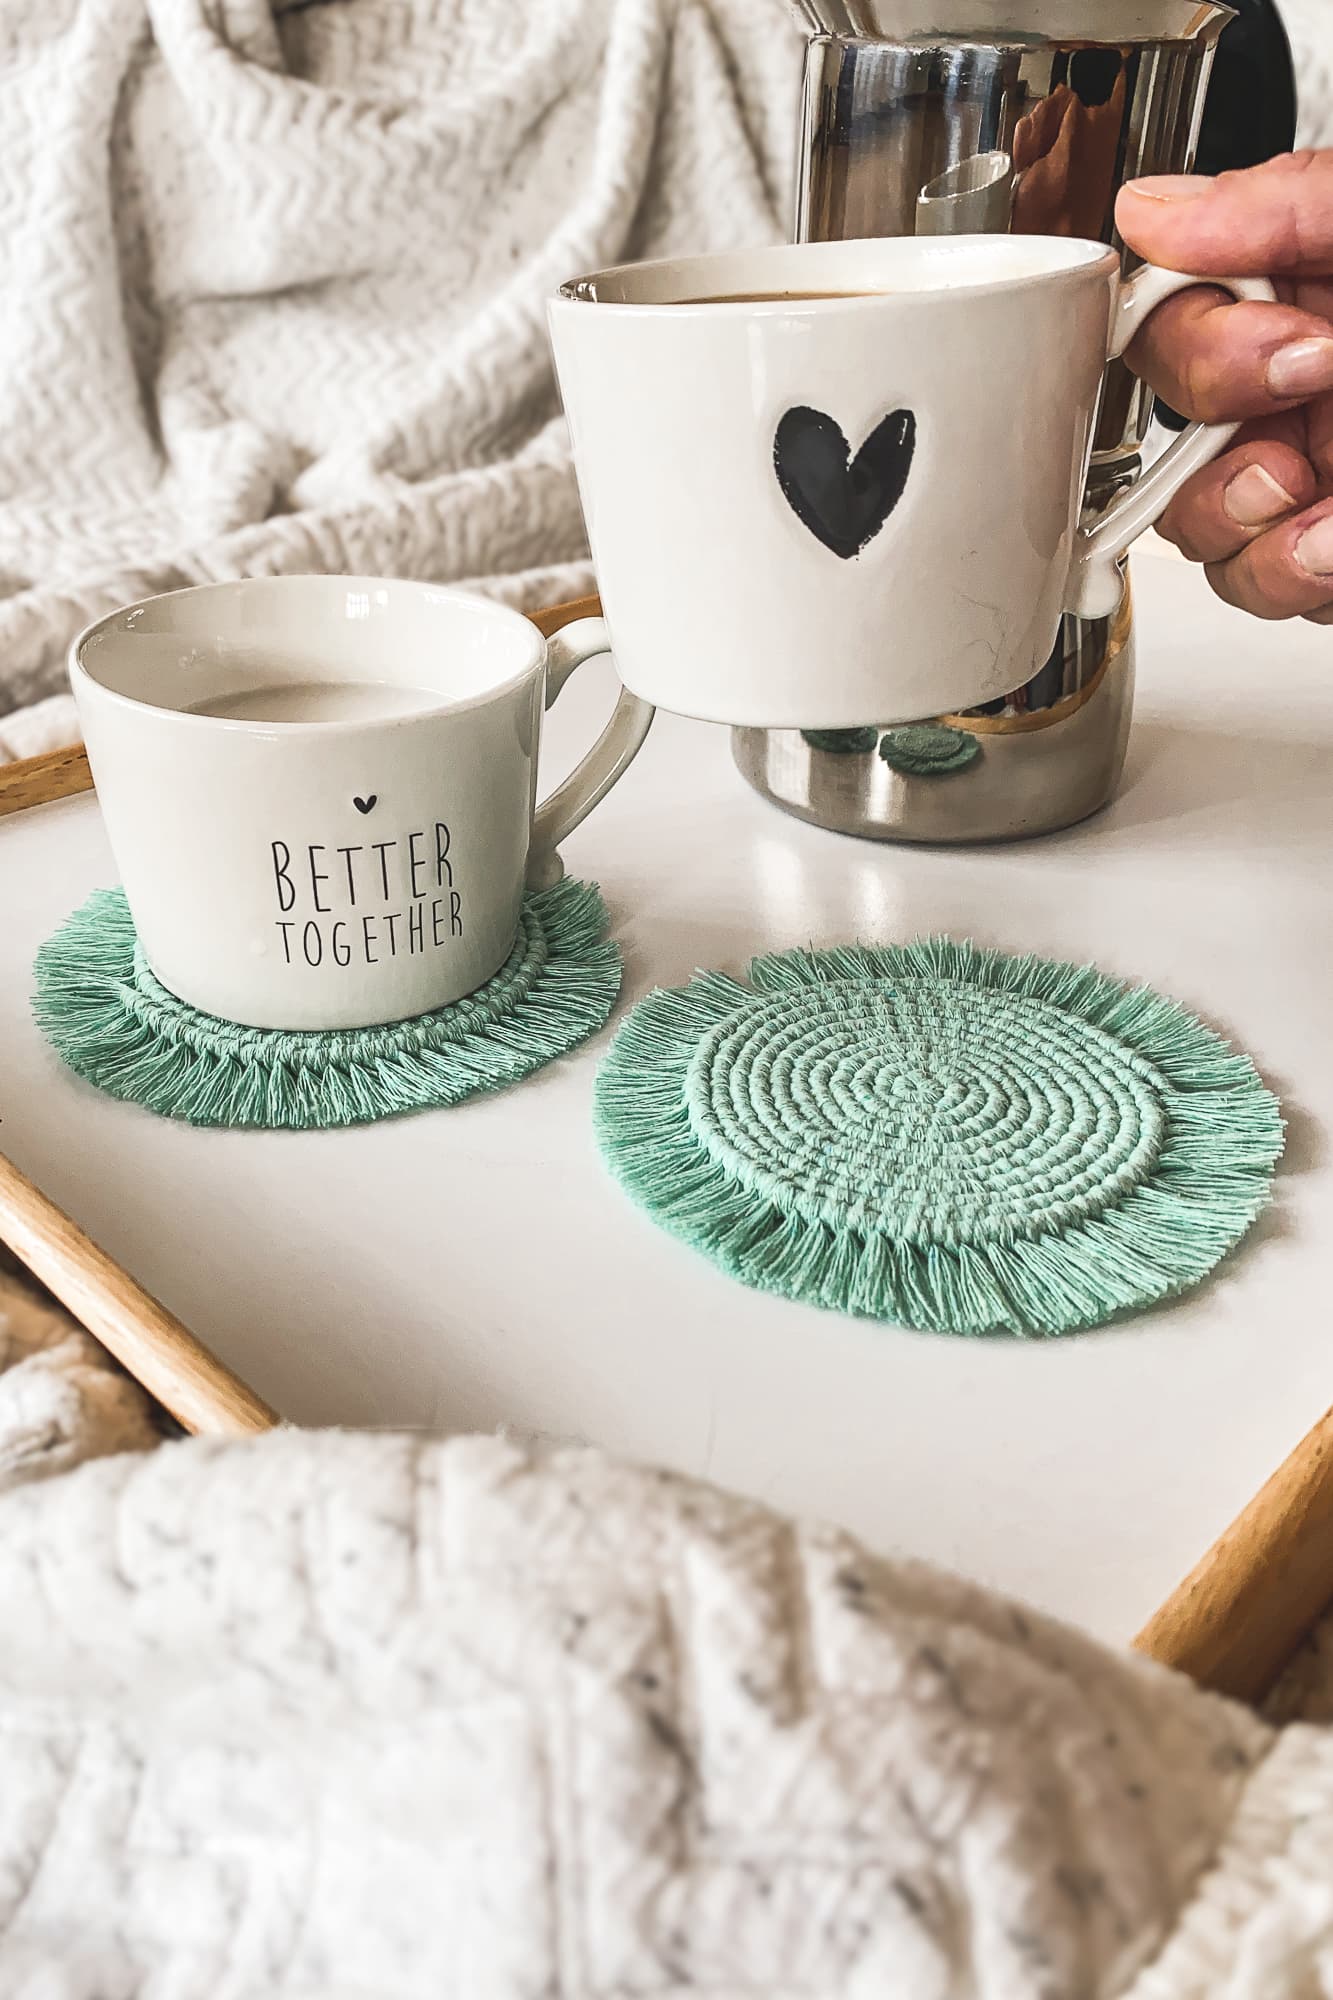 How to sell coasters online on etsy